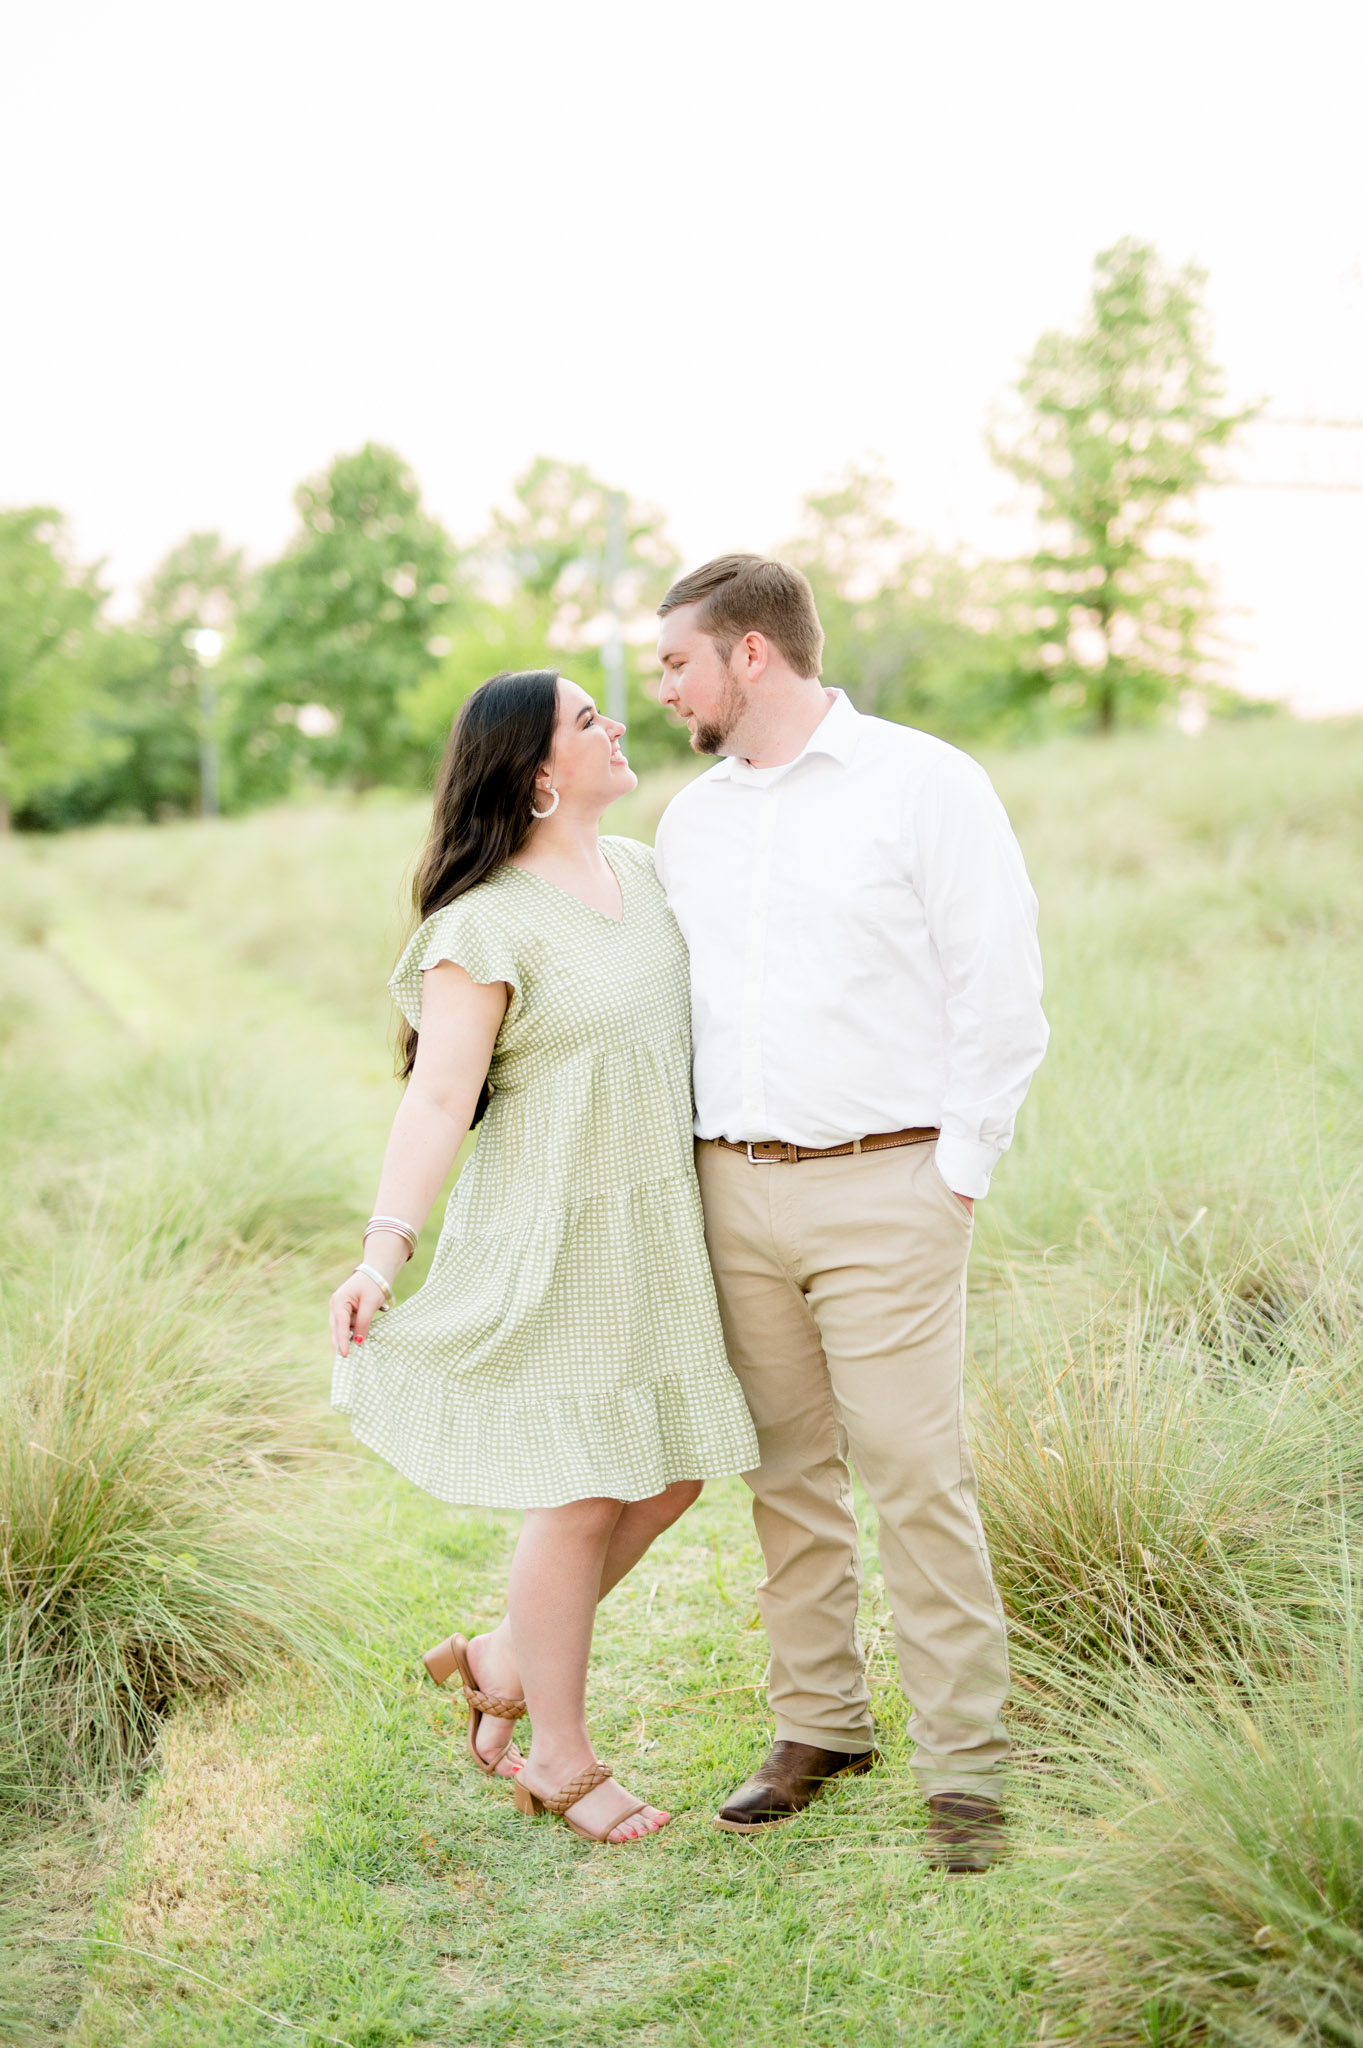 Couple looks and smiles at each other in field.